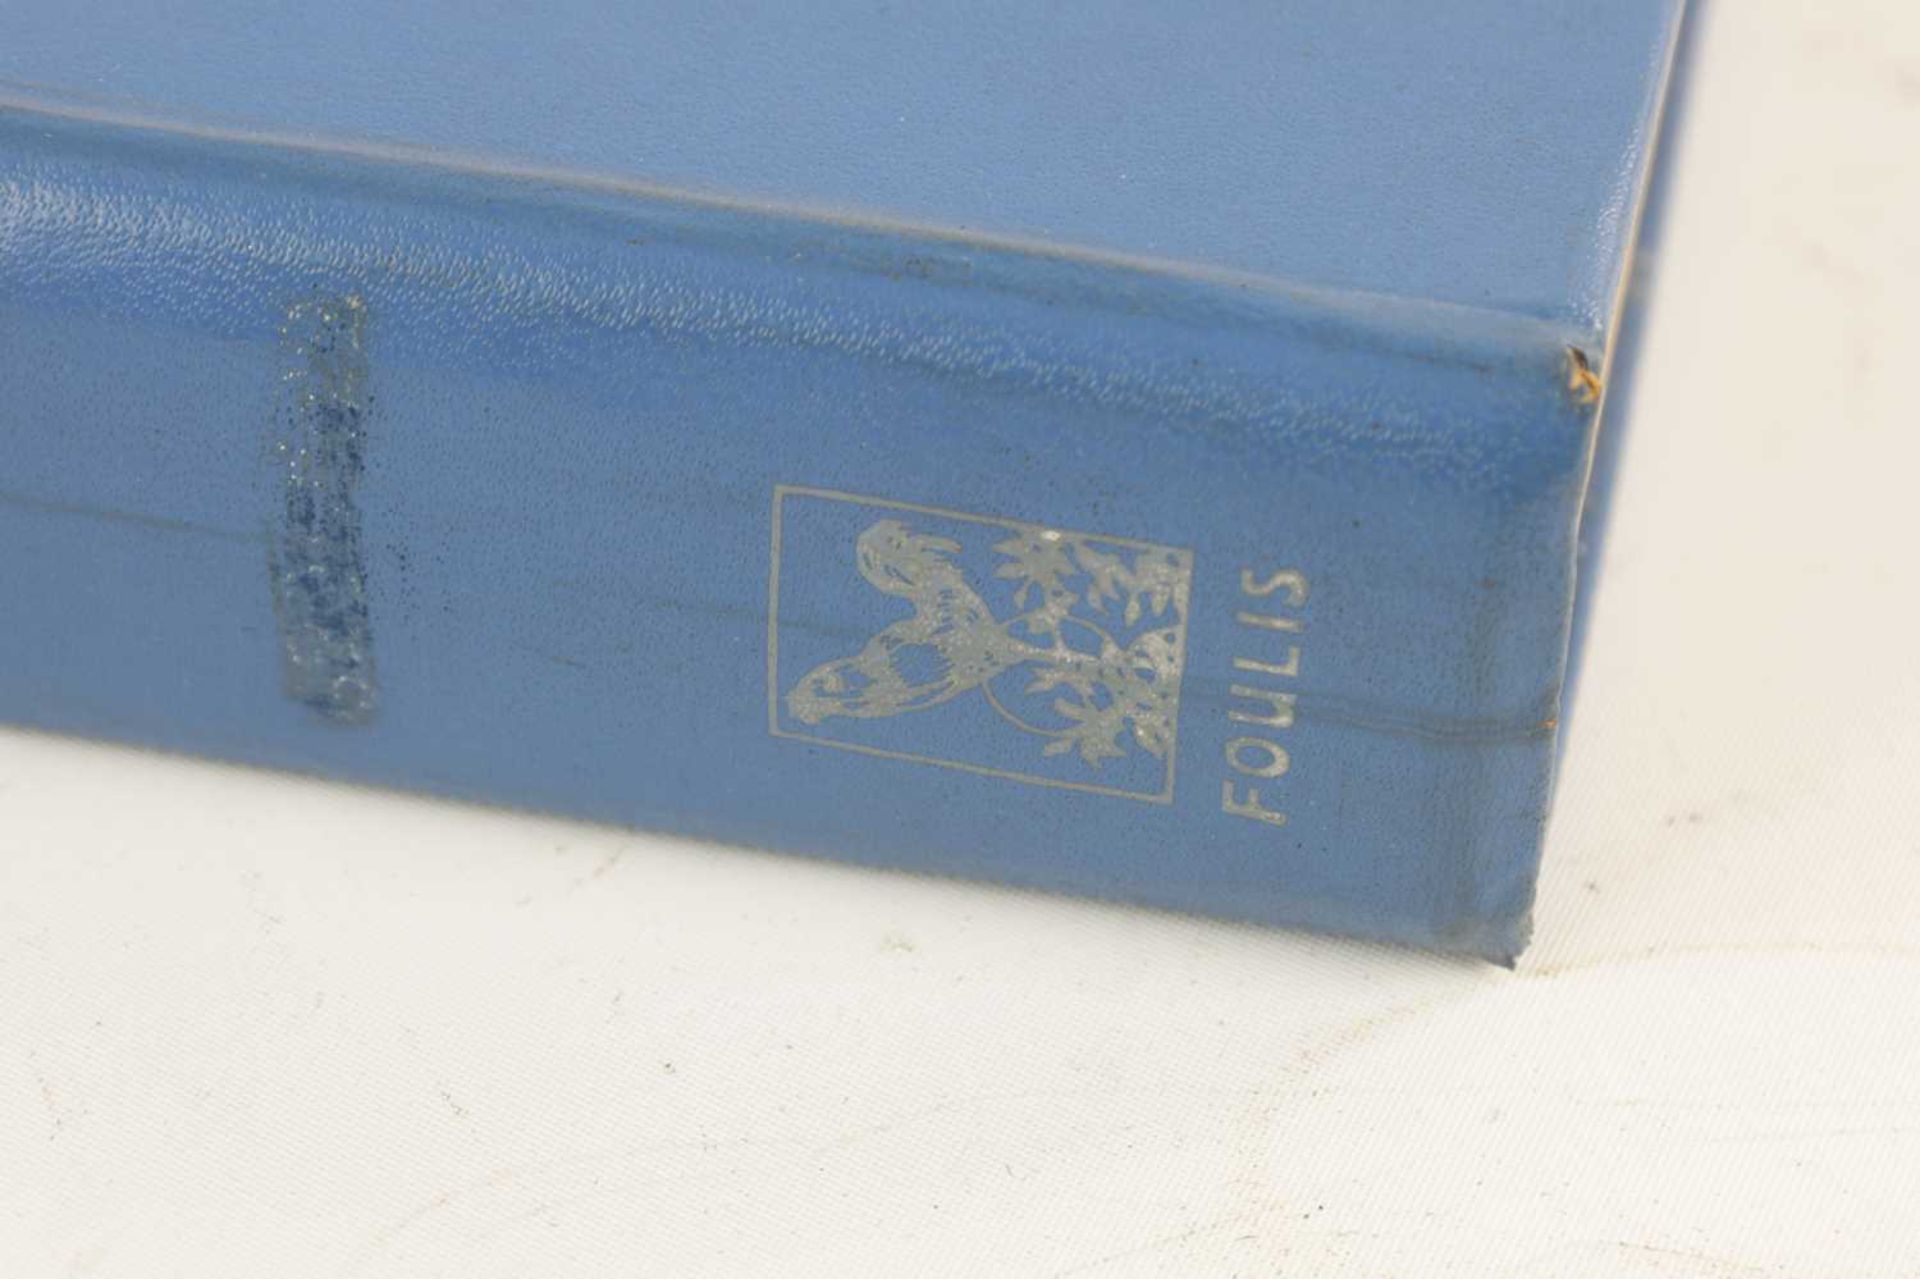 ‘BUGATTI’ FIRST EDITION HARDBACK BY H.G. CONWAY - Image 4 of 8